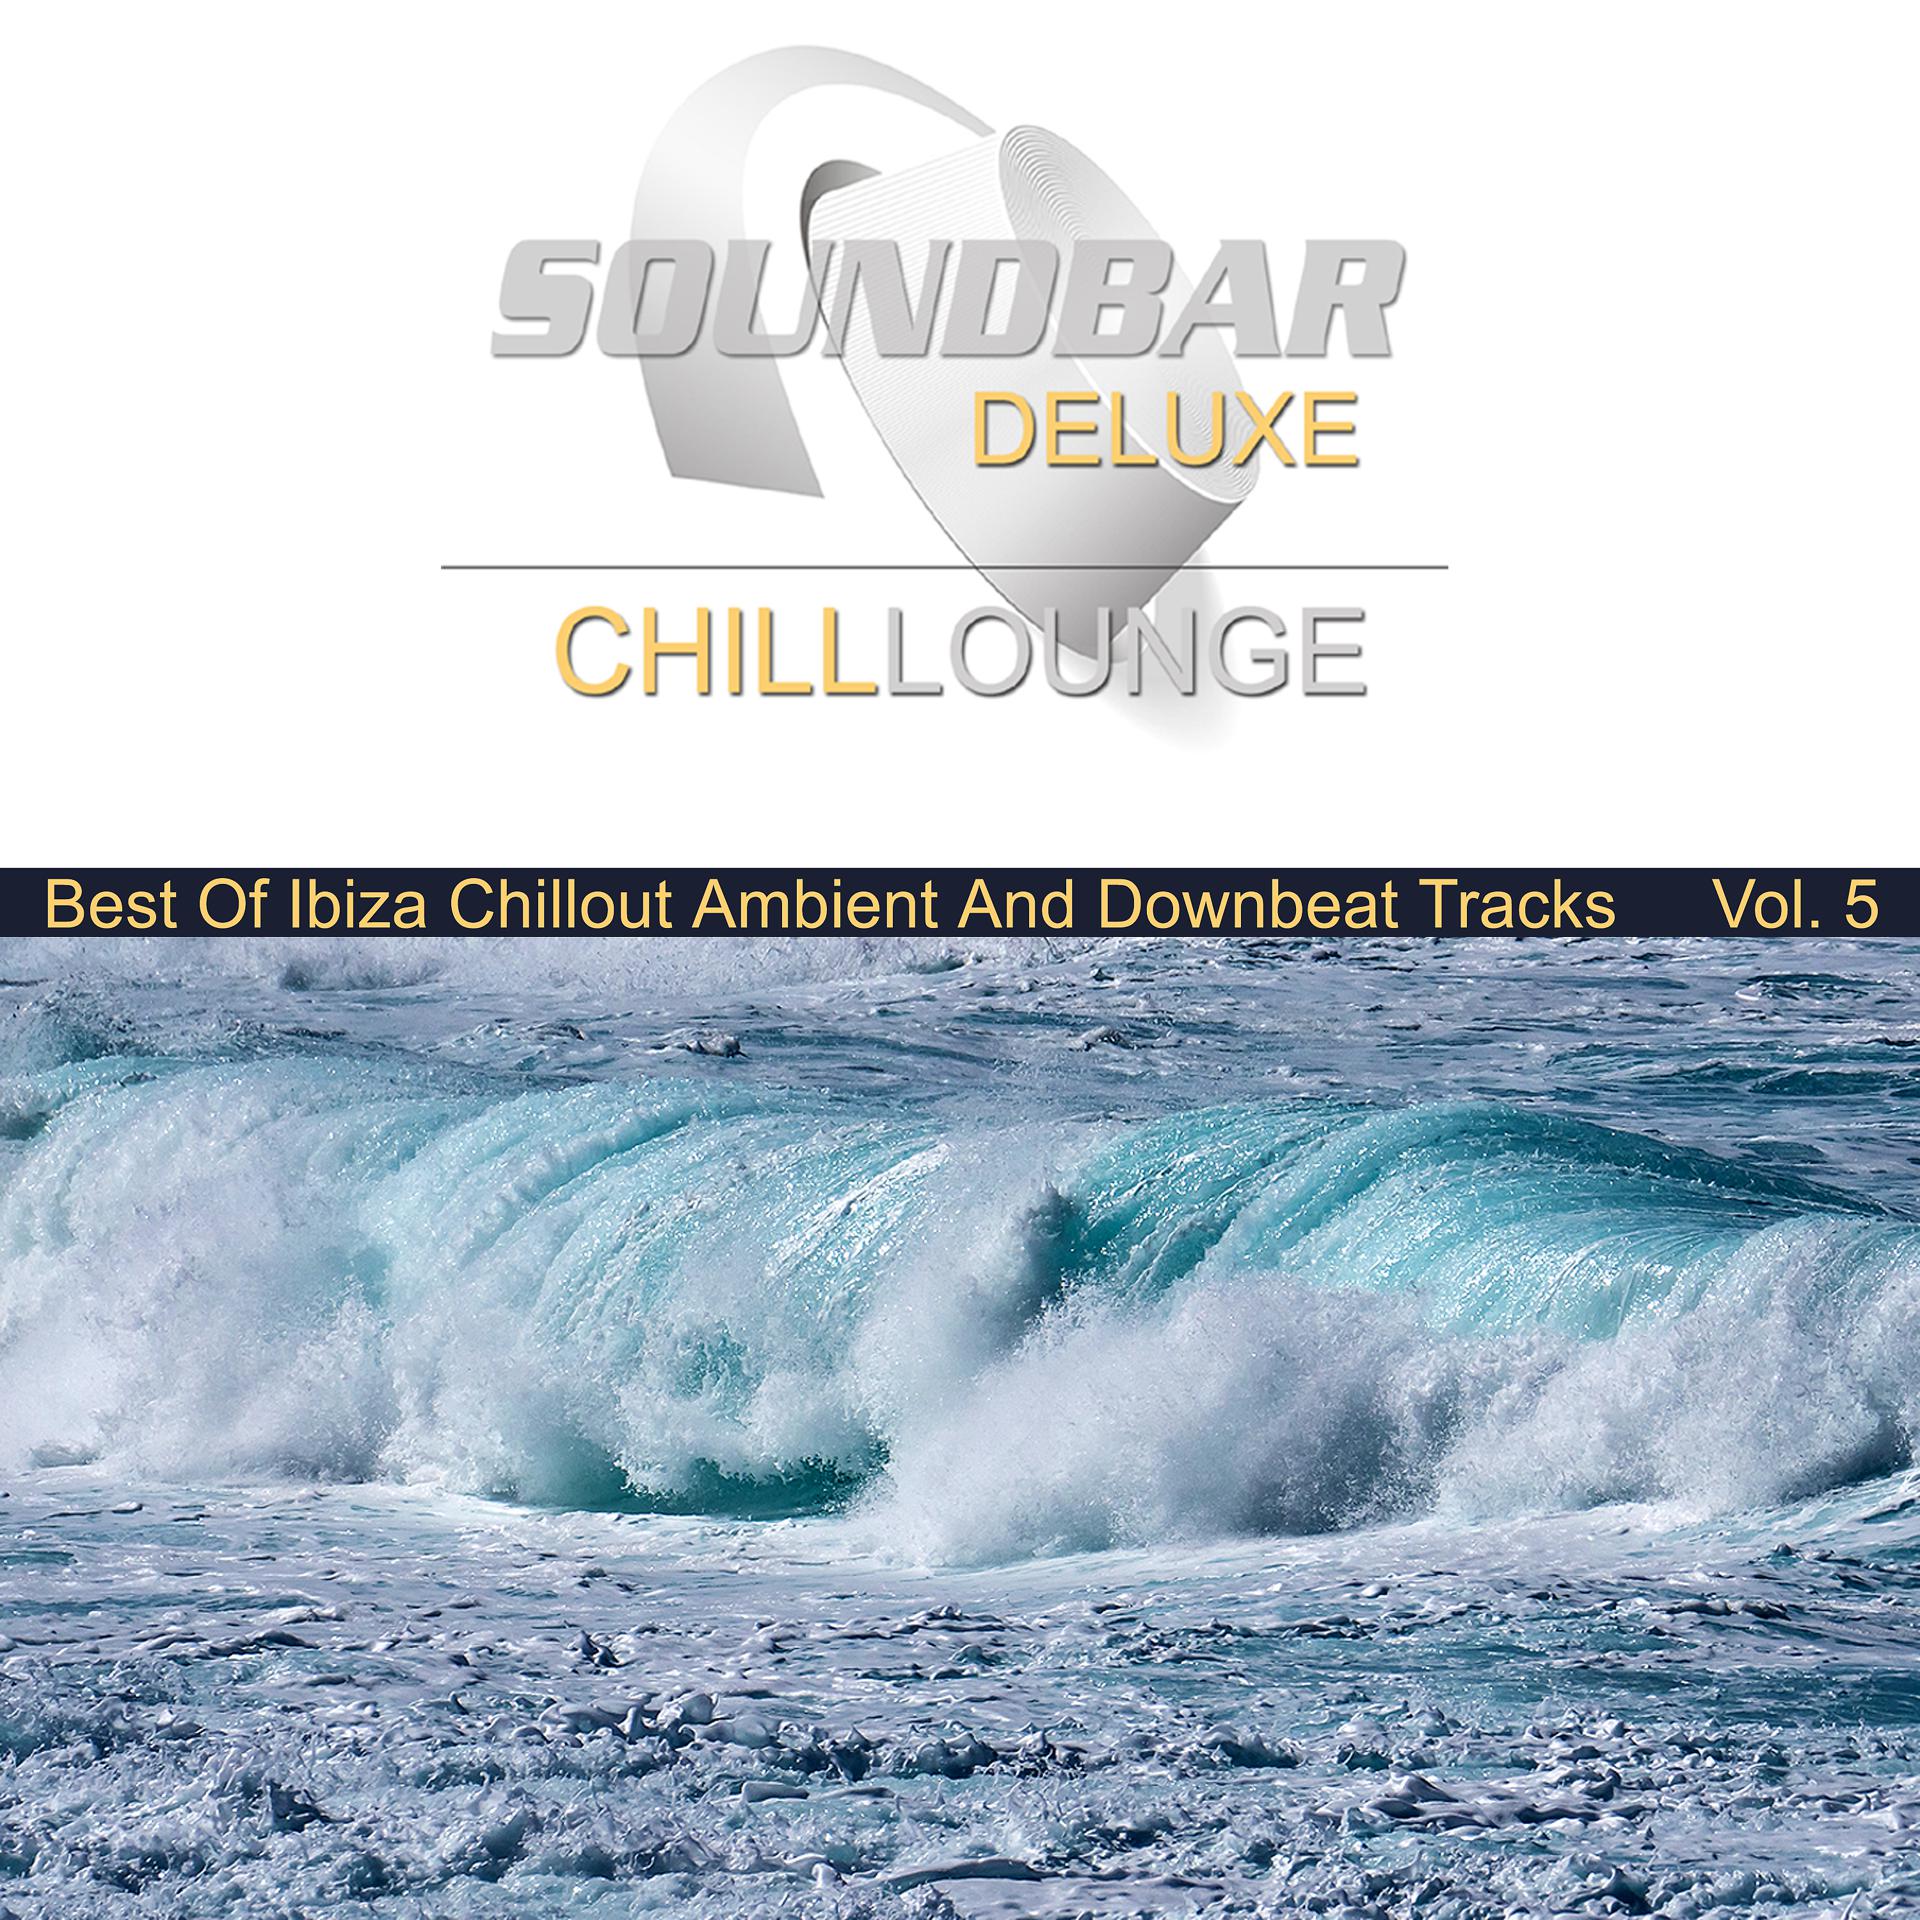 Постер альбома Soundbar Deluxe Chill Lounge, Vol. 5 (Best of Ibiza Chillout Ambient and Downbeat Tracks)